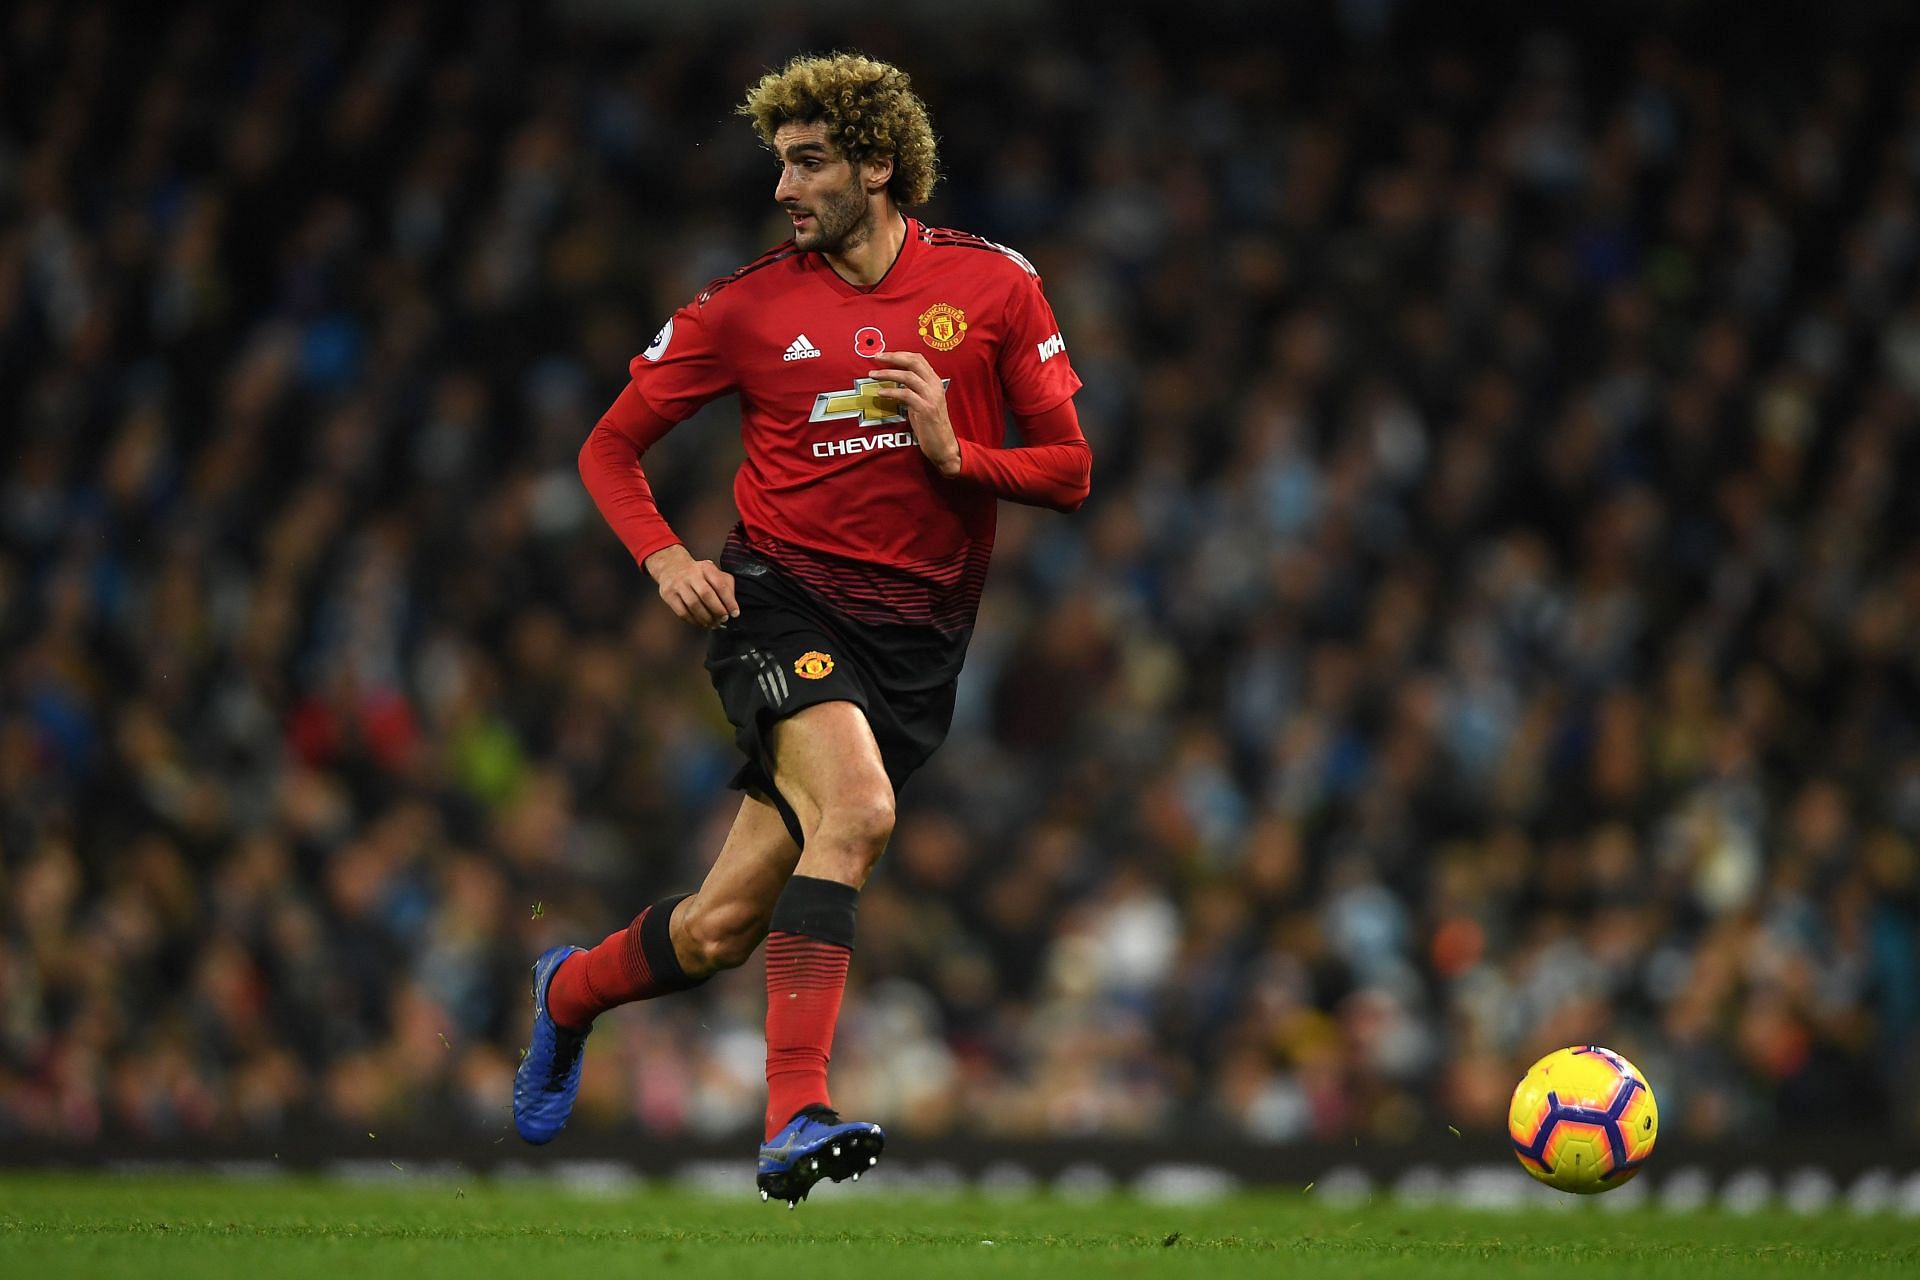 Marouane Fellaini largely divided opinion at Manchester United despite conjuring up some big moments.